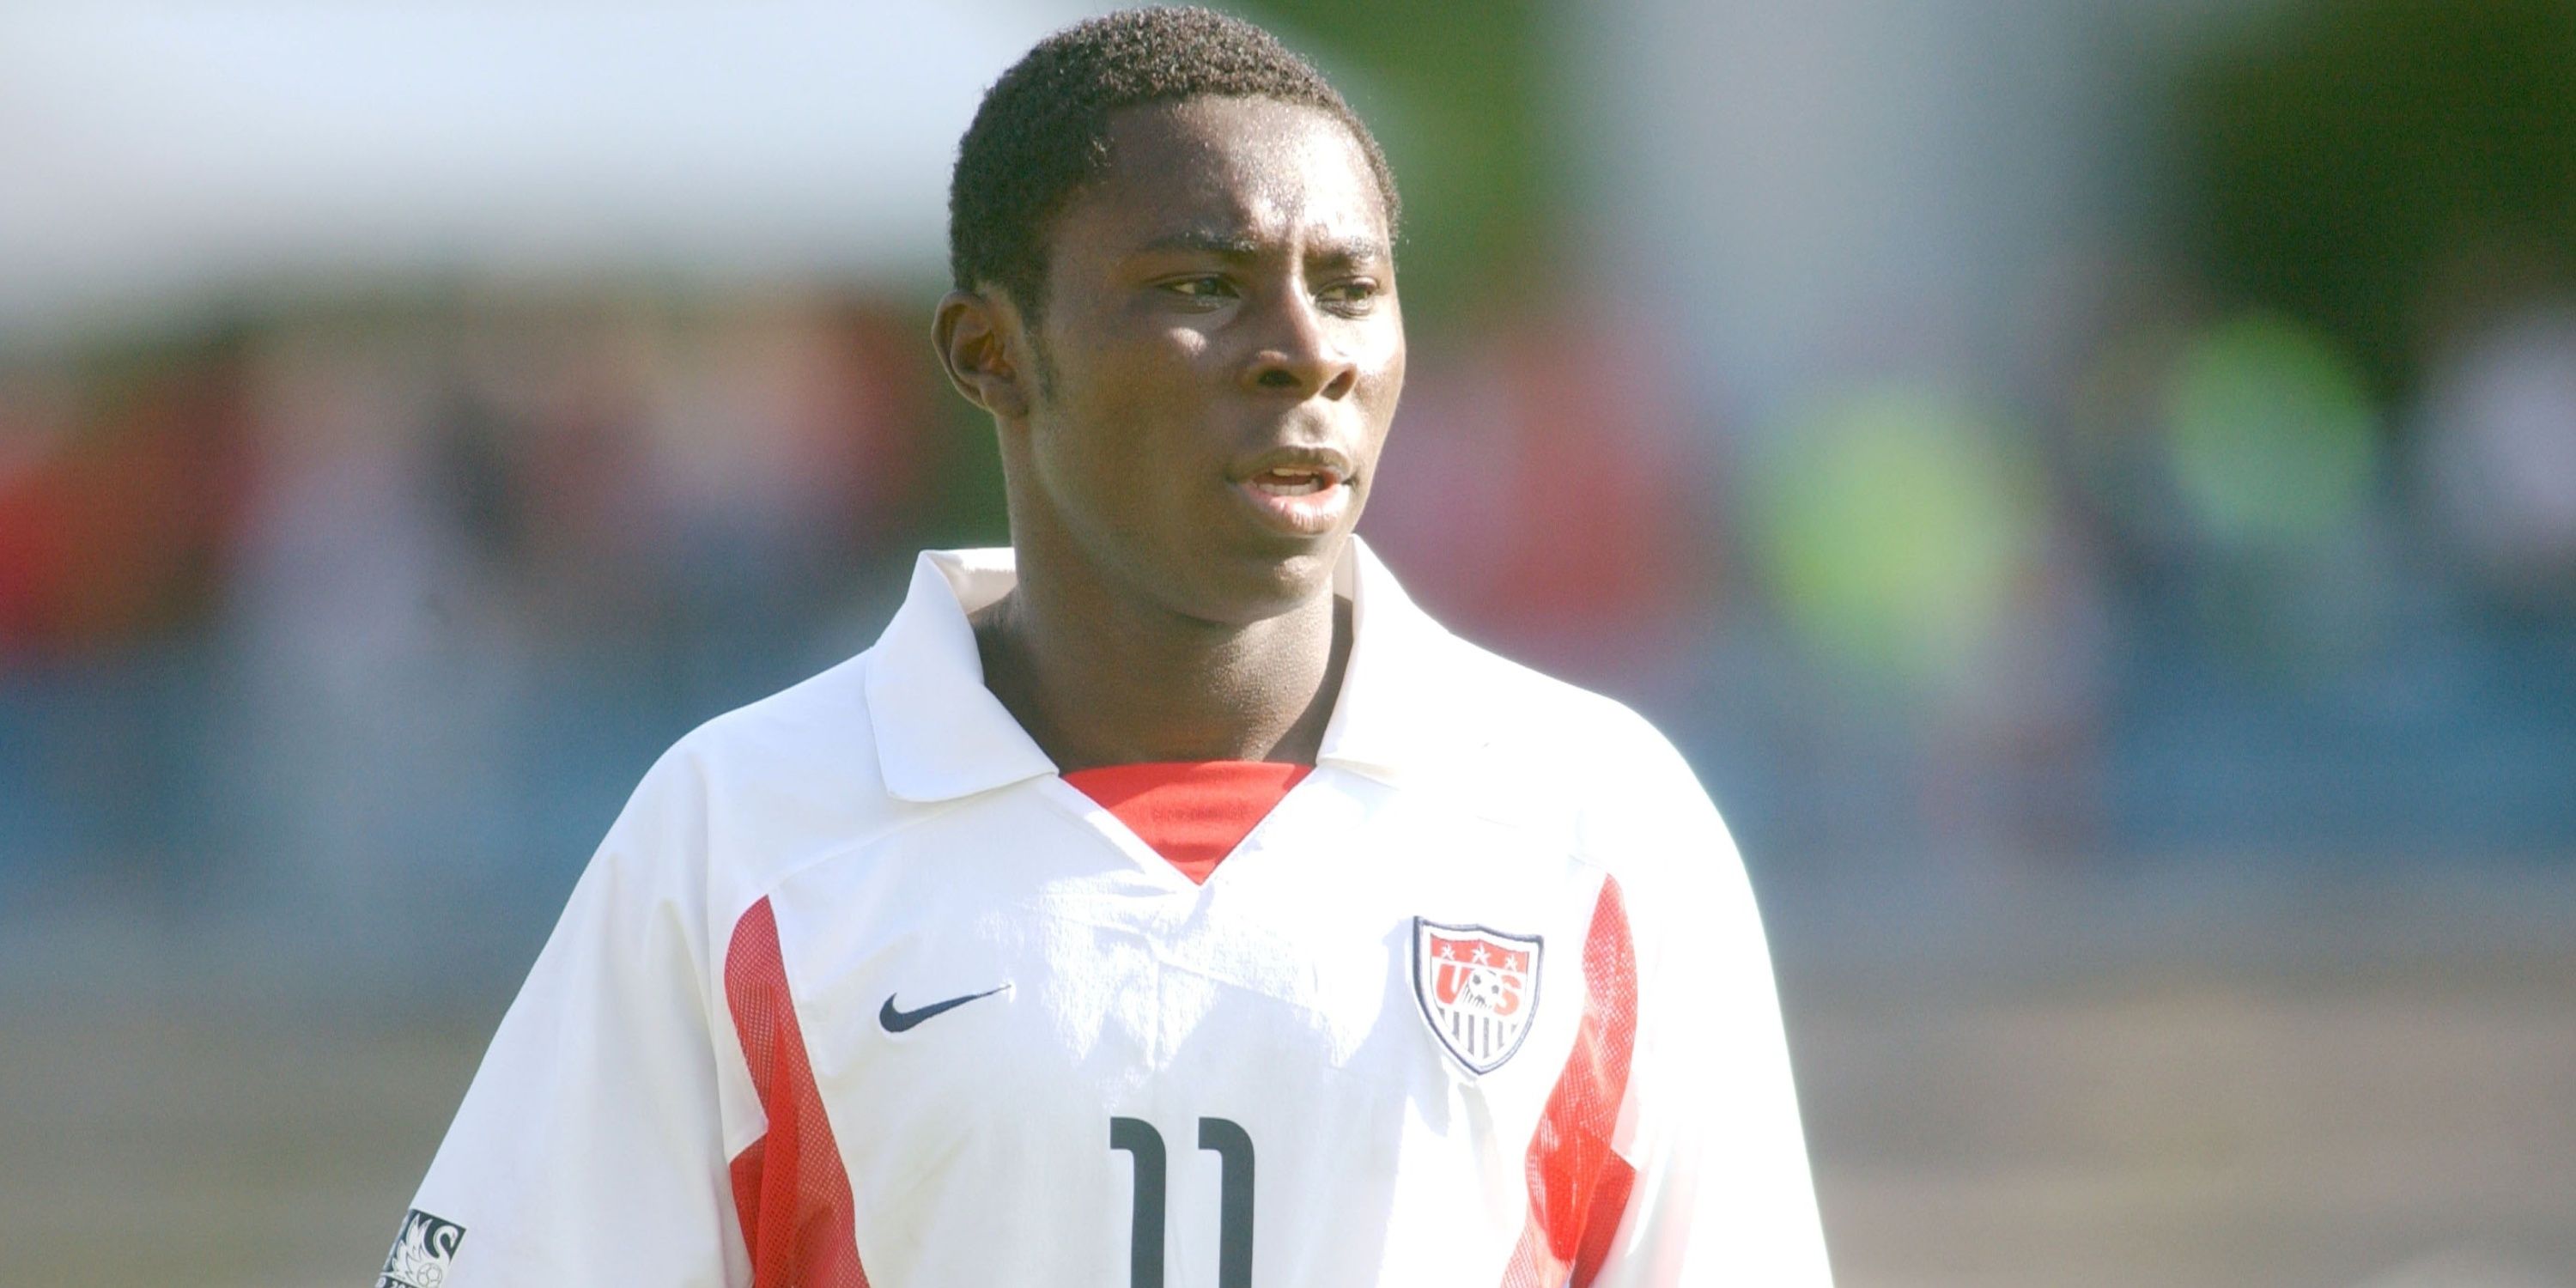 Freddy Adu in action for USA